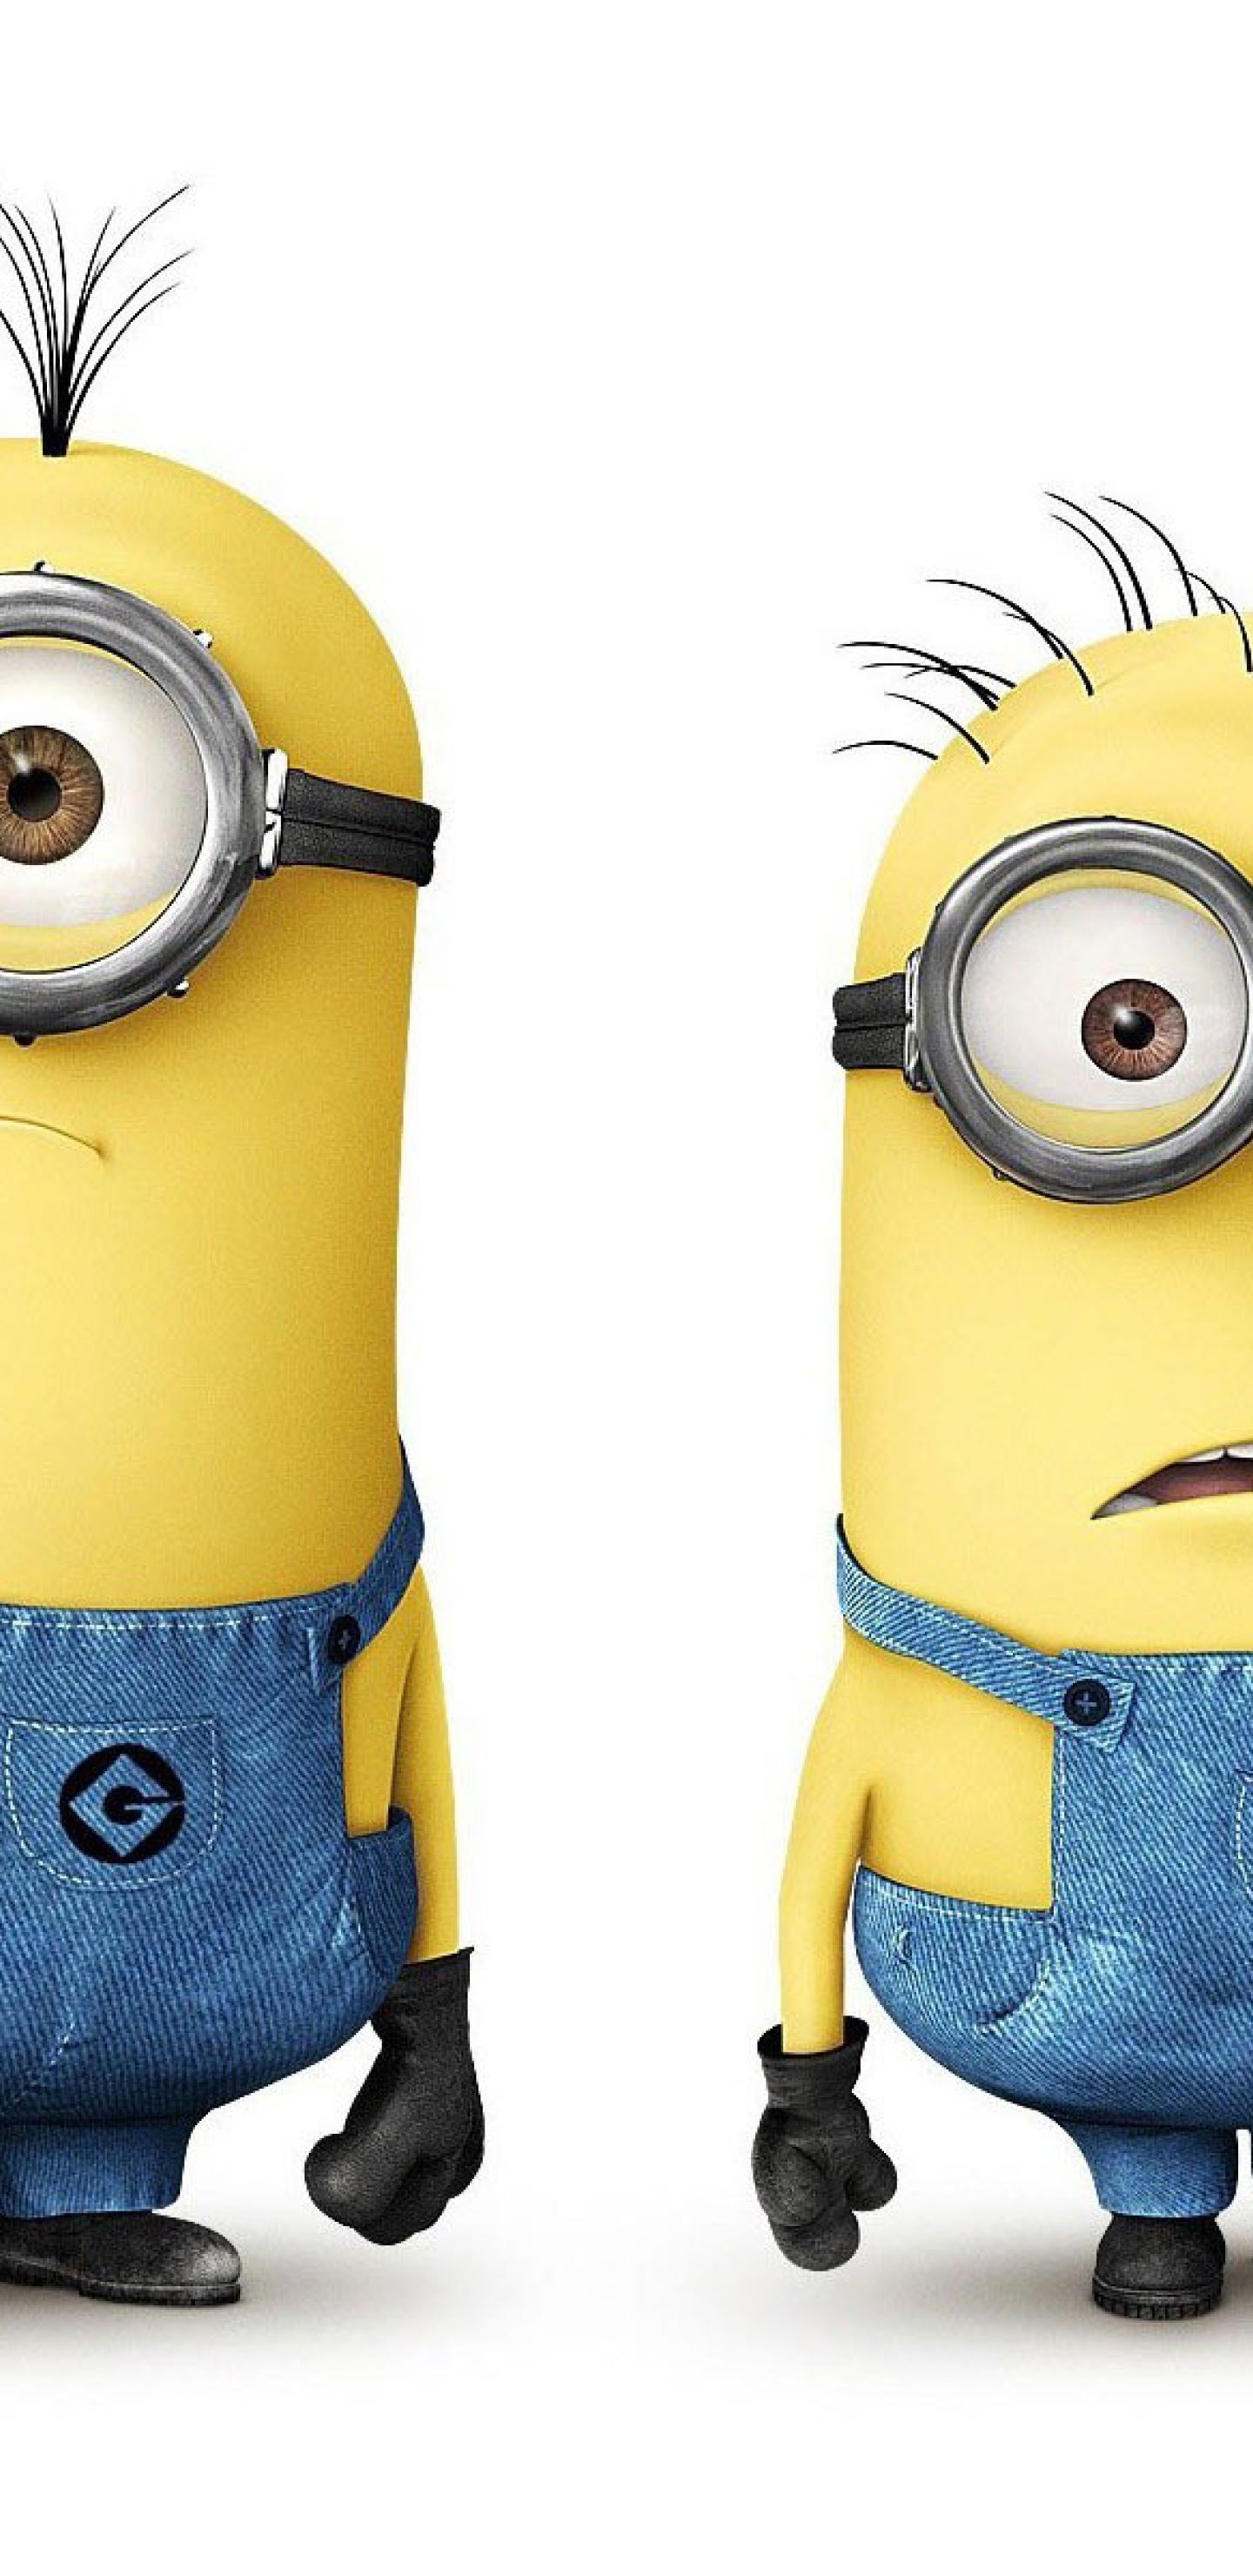 Tim And Phil Despicable Me Minions Wallpaper Samsung